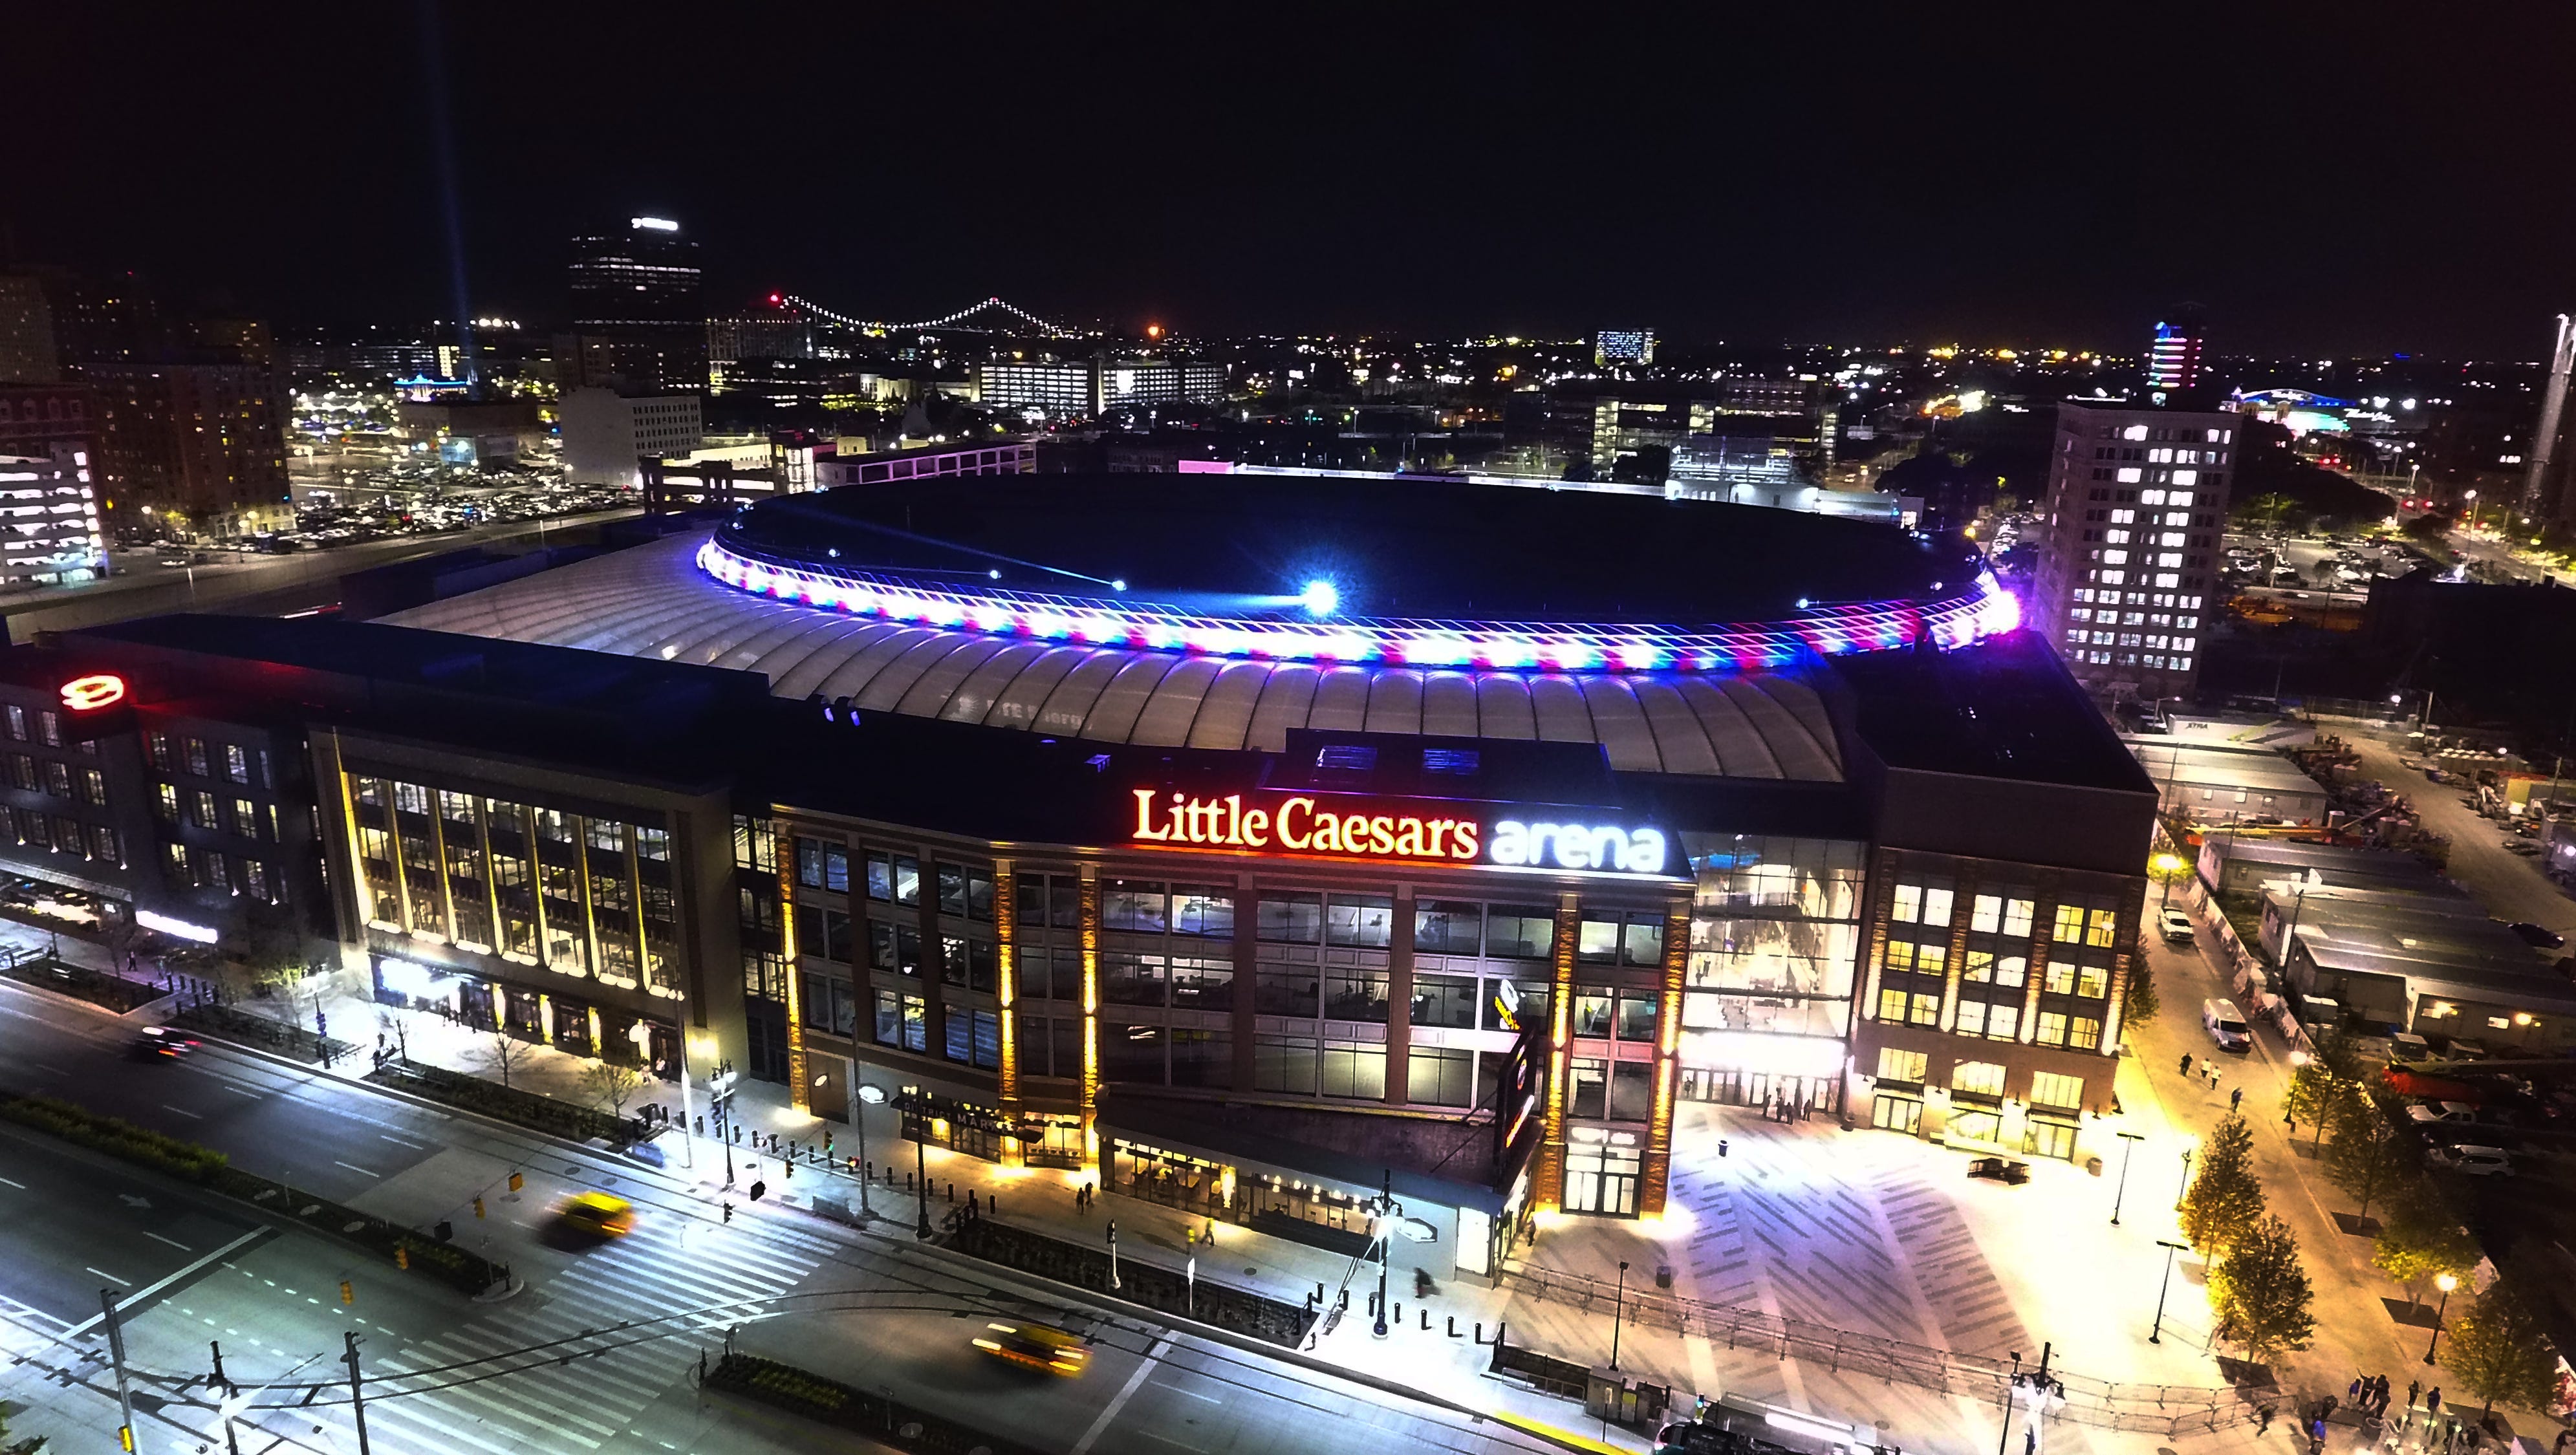 Little Caesars Arena is all lit up for its opening night, a Kid Rock concert on Tuesday, September 12, 2017.